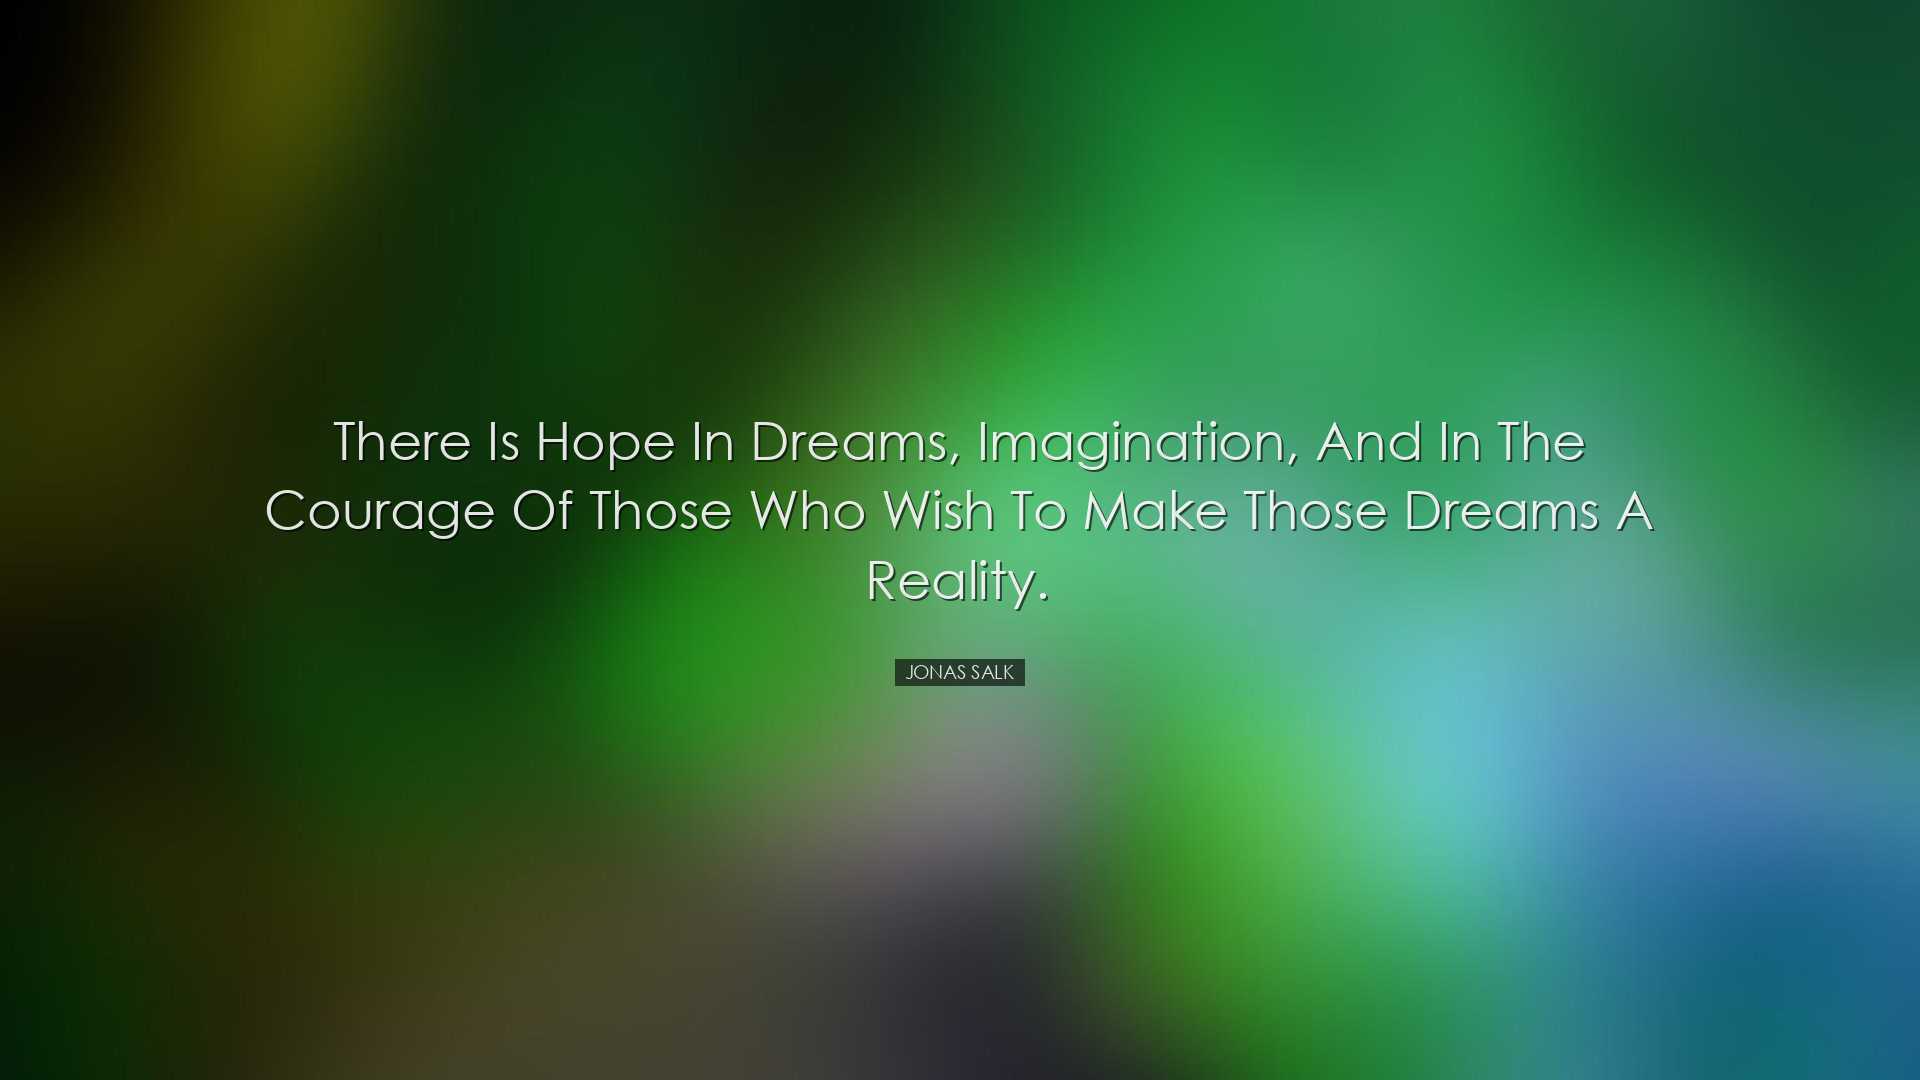 There is hope in dreams, imagination, and in the courage of those